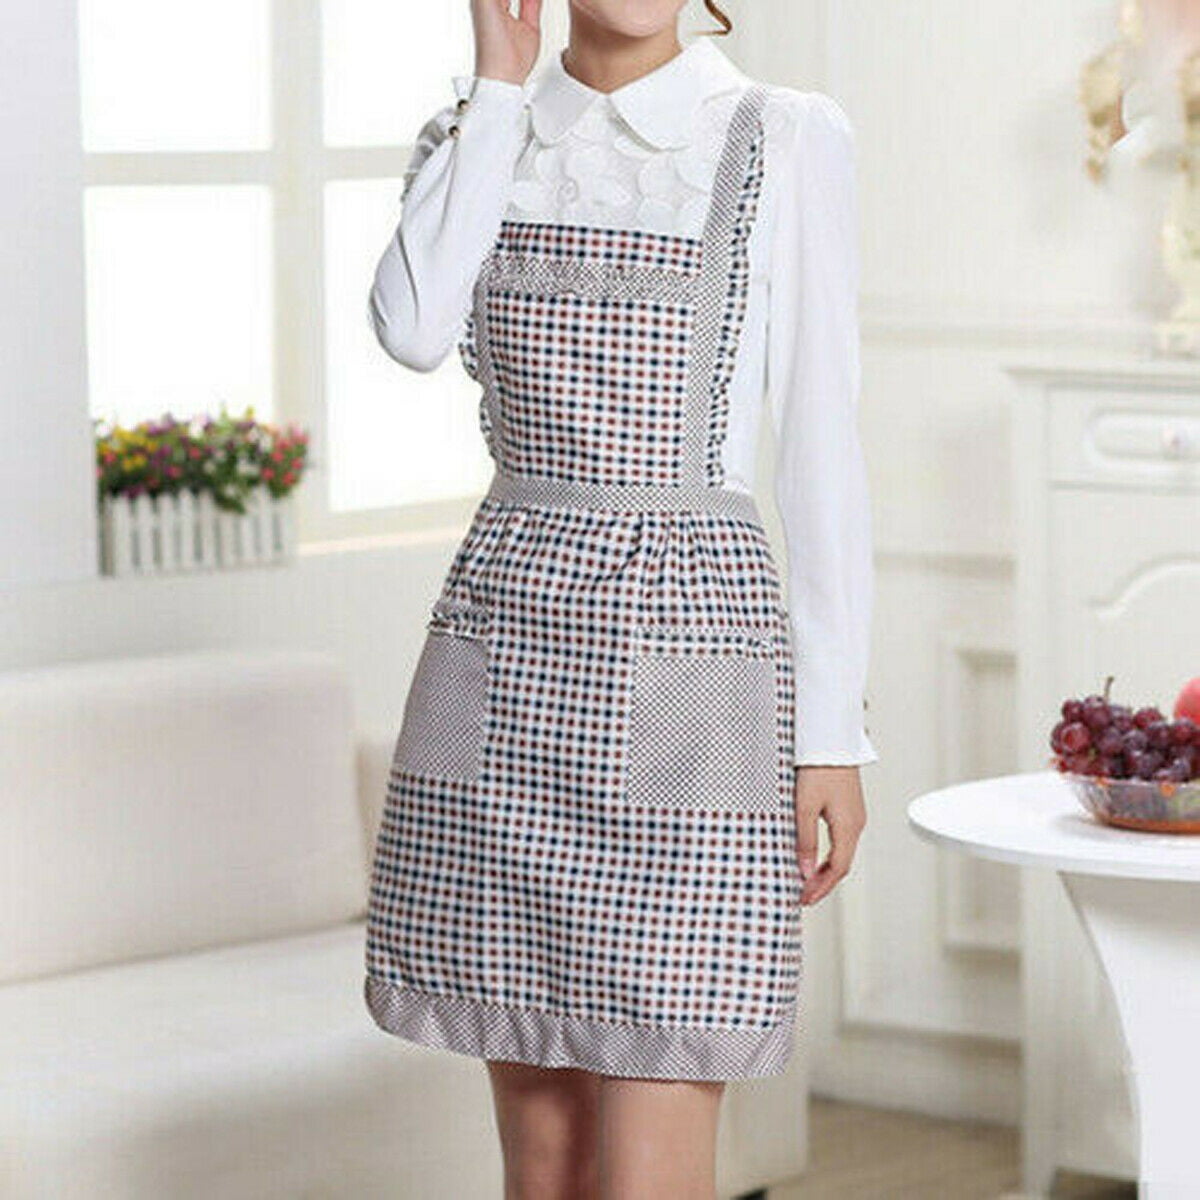 Cooking dress